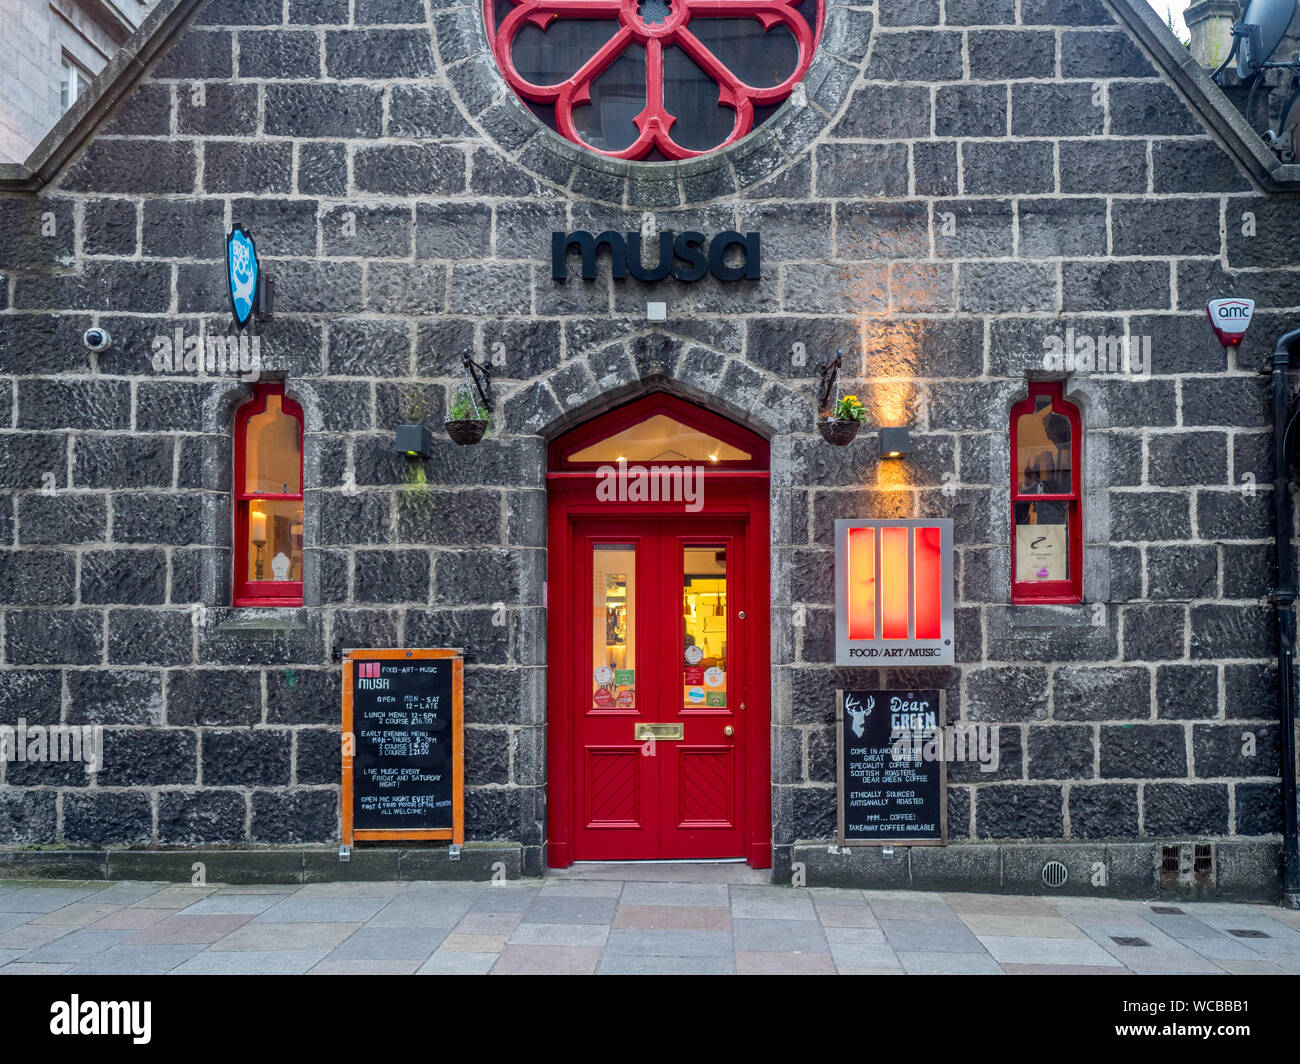 The Musa food, art and music venue in the evening on July 24, 2017 in Aberdeen, Scotland. Musa is a popular spot for Aberdeen nightlife. Stock Photo